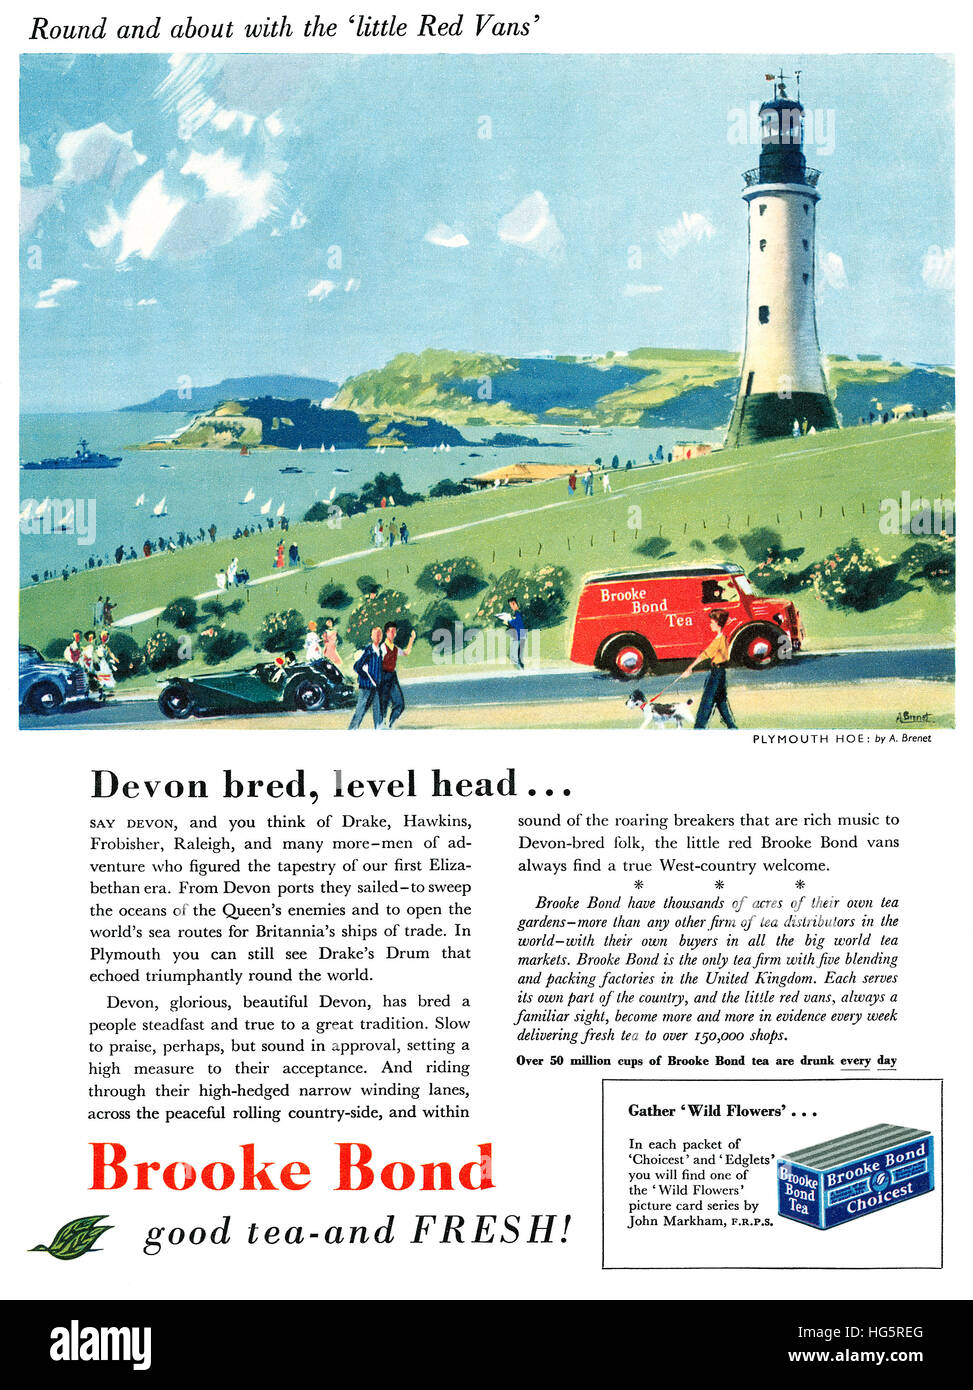 1955 British advertisement for Brooke Bond Tea featuring an illustration of Plymouth Hoe by A. Brent Stock Photo